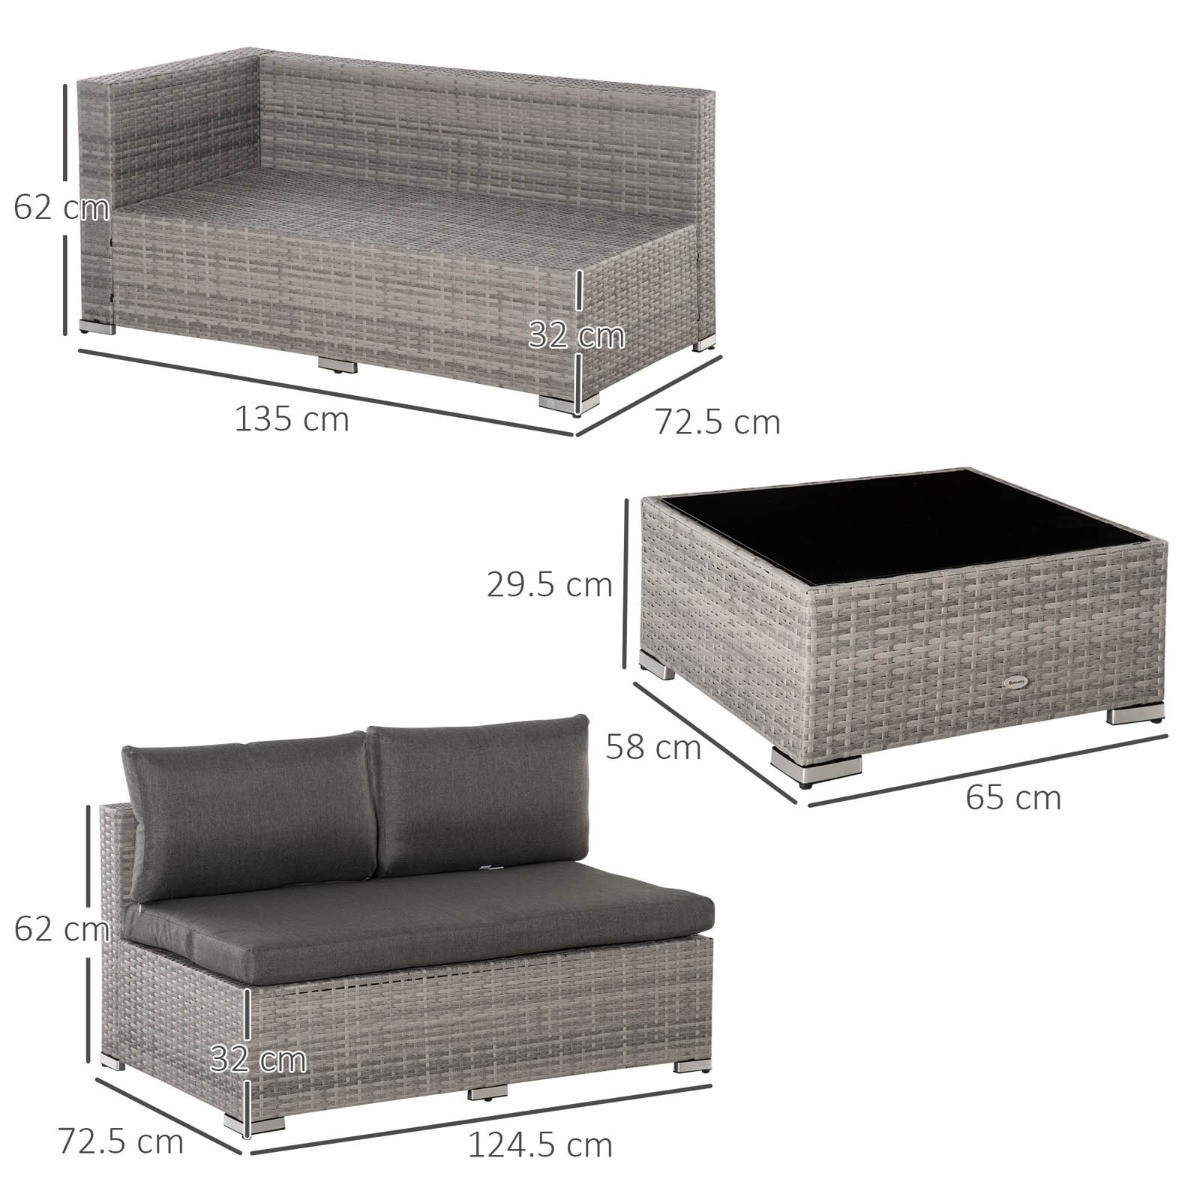 Outsunny Wicker Rattan Sofa Set With Coffee Table, Grey - 6 Seater>